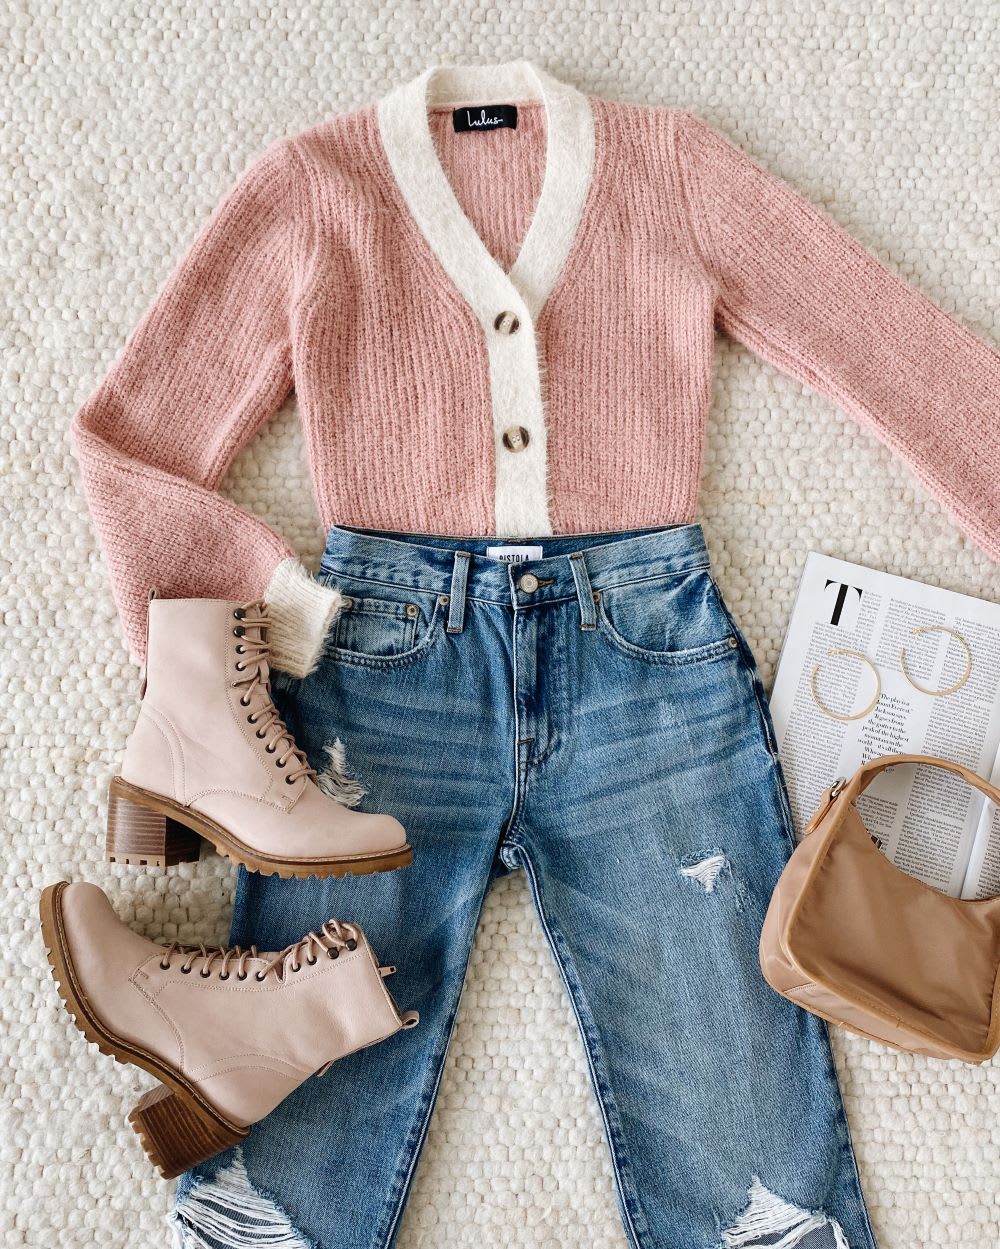 How To Style A Cardigan: 14 Cardigan Outfits Who What Wear | tyello.com